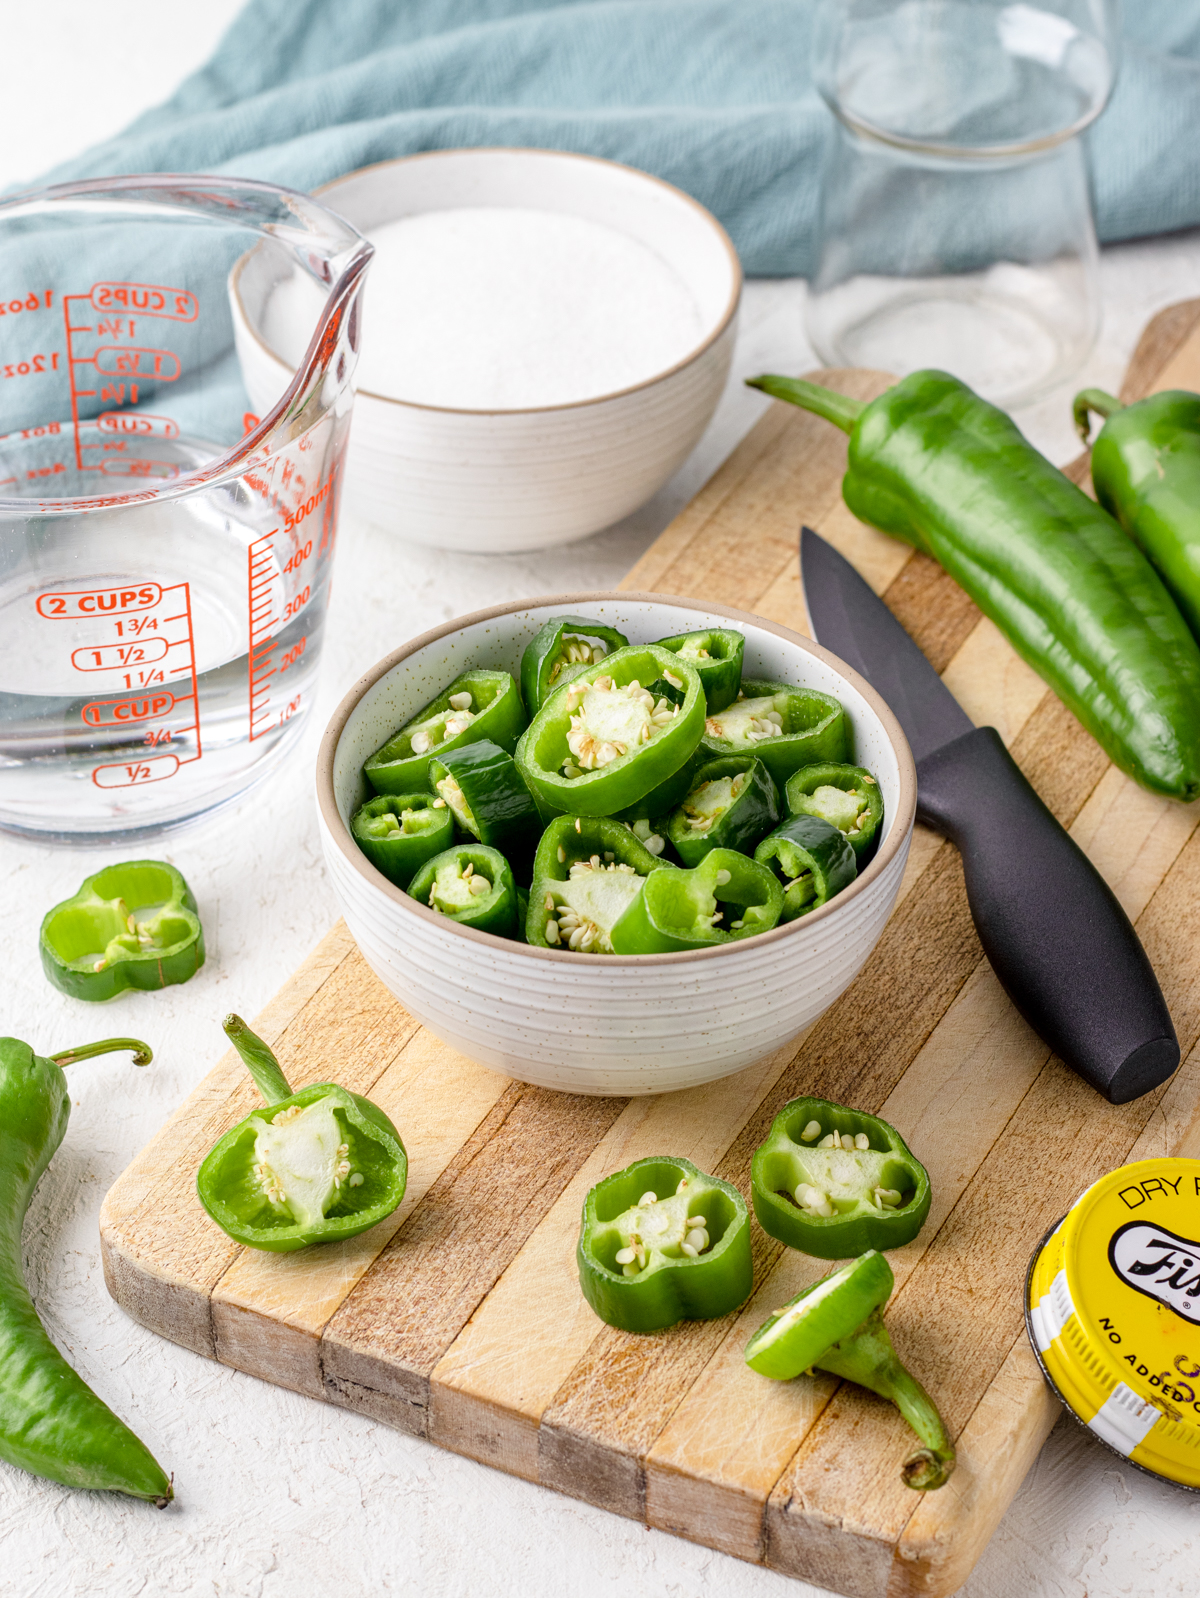 Bowl of sliced jalapenos setting on a cutting board with a knife, water, sugar, a jar for storing, and a blue towel on the side.